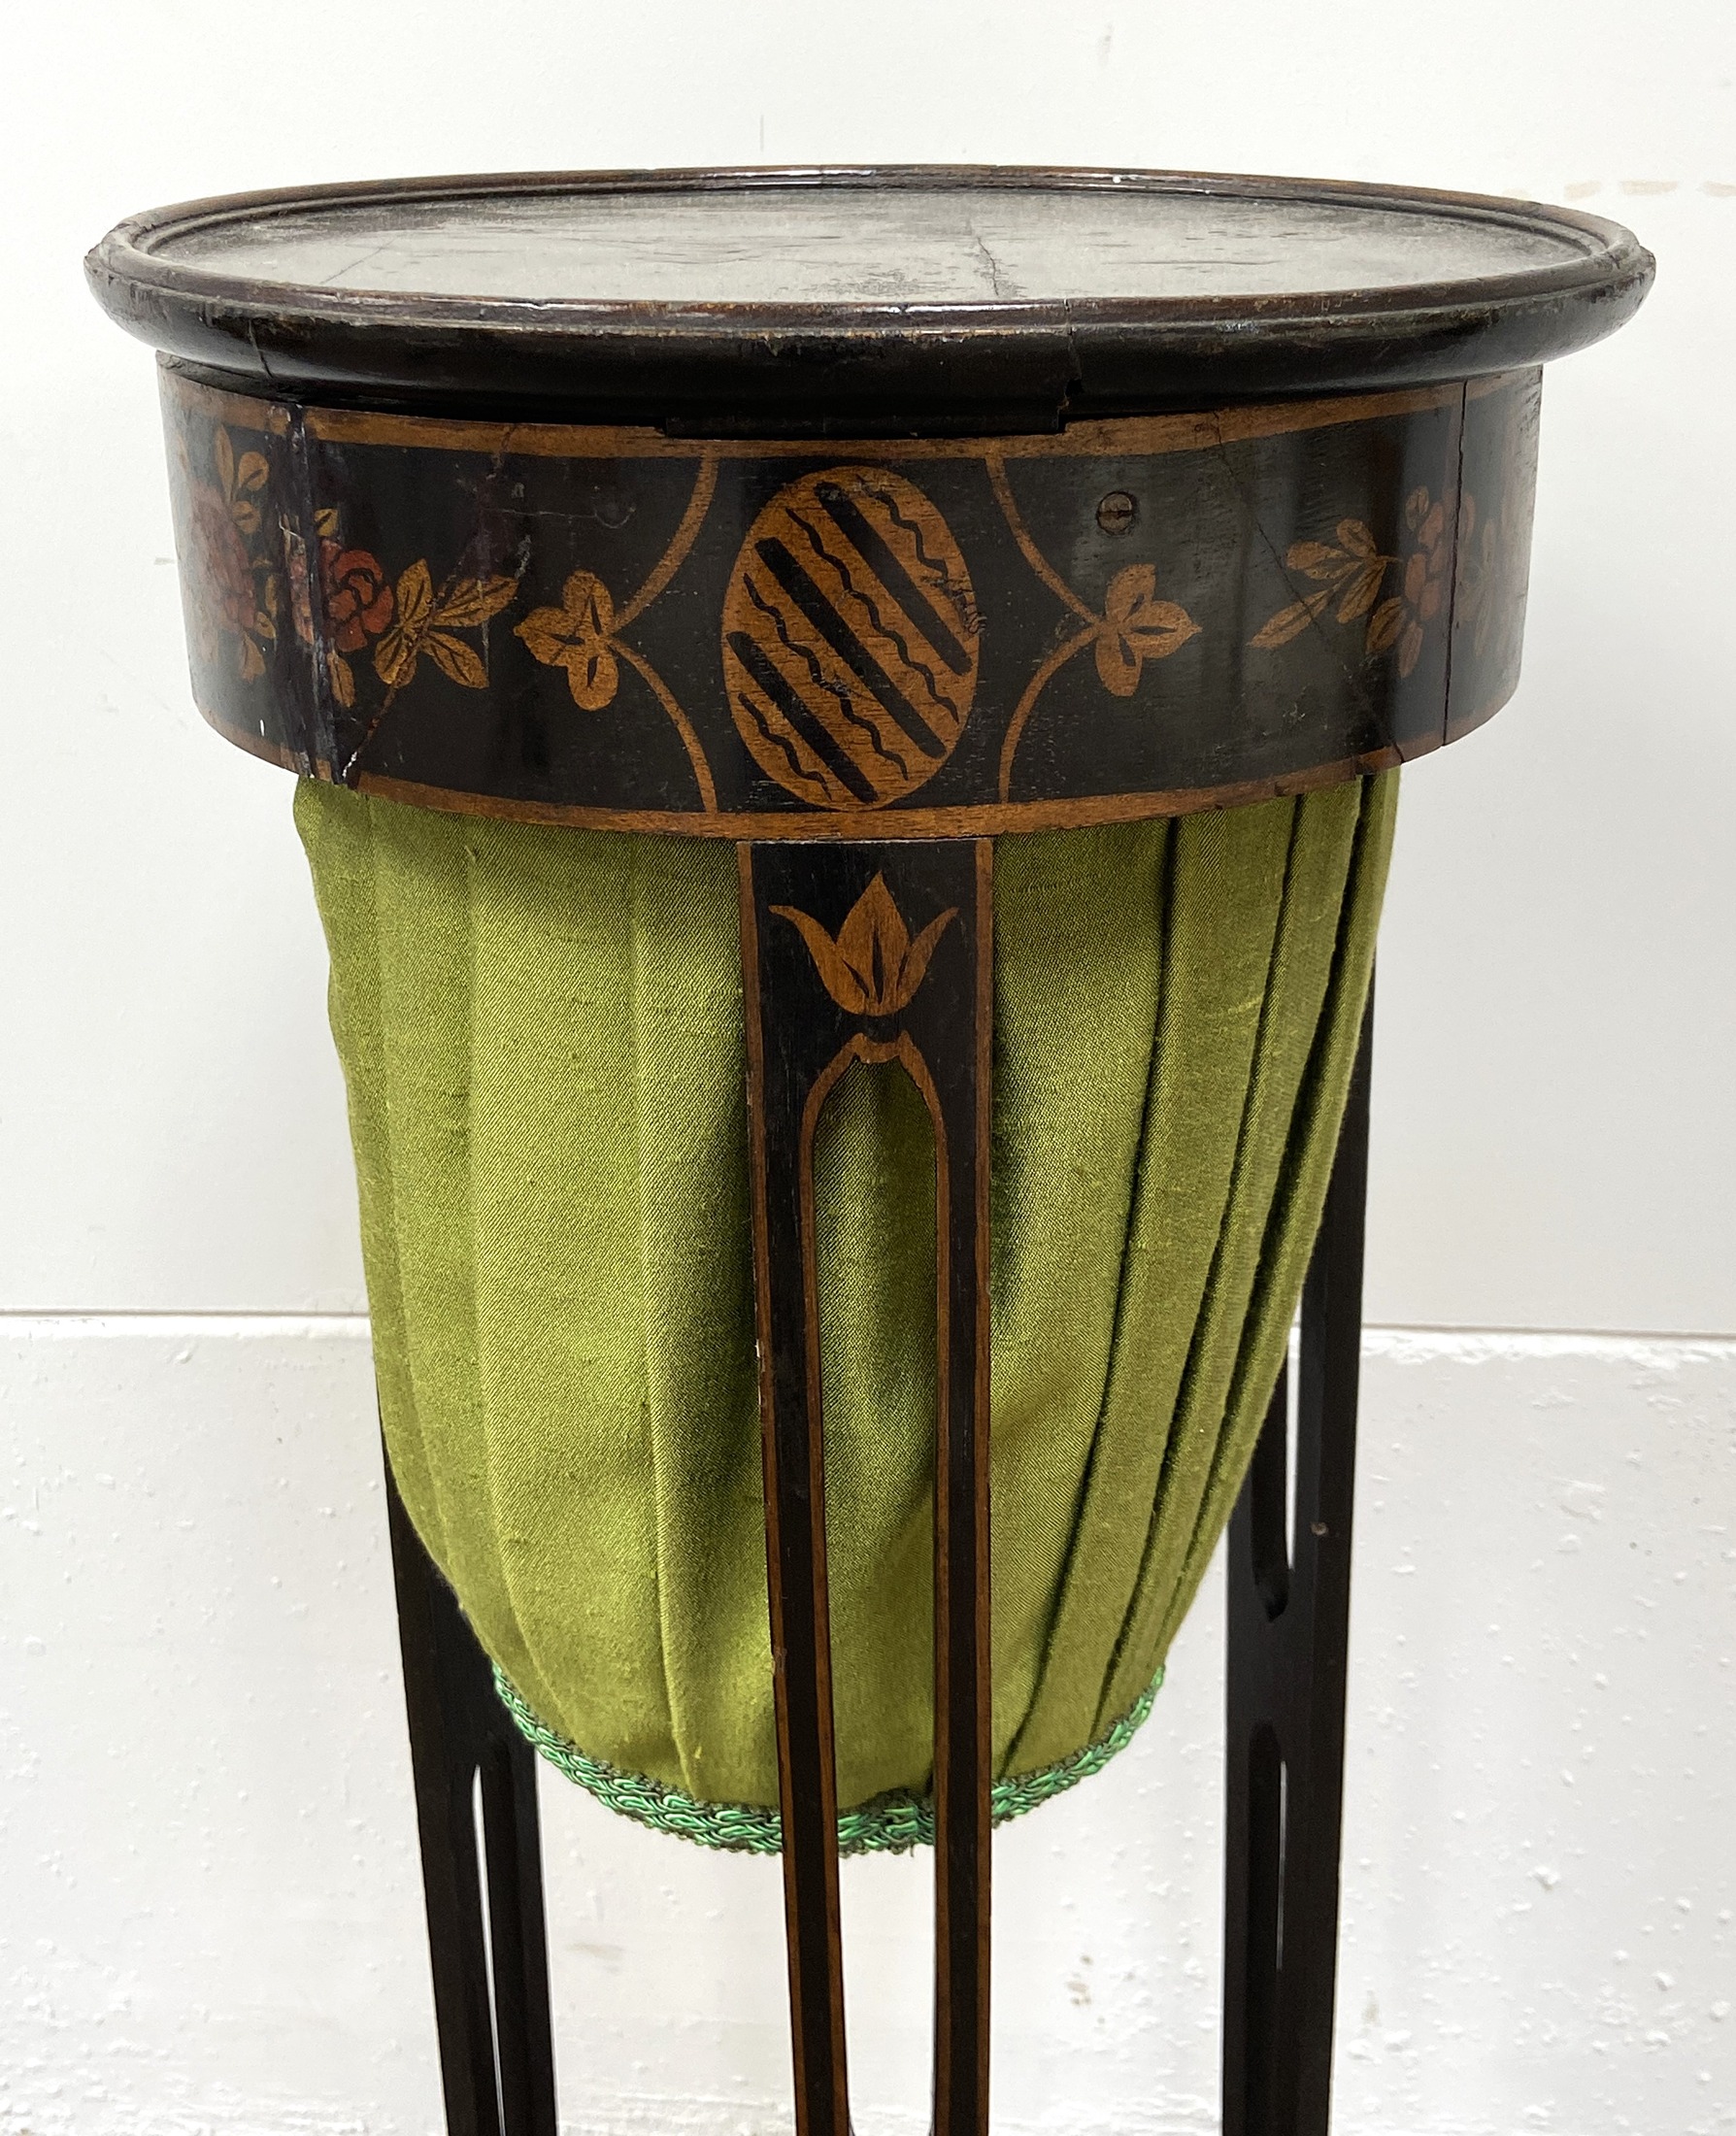 A 19th century Japanned work table, with a hinged circular lid, inner tray and fabric covered basket